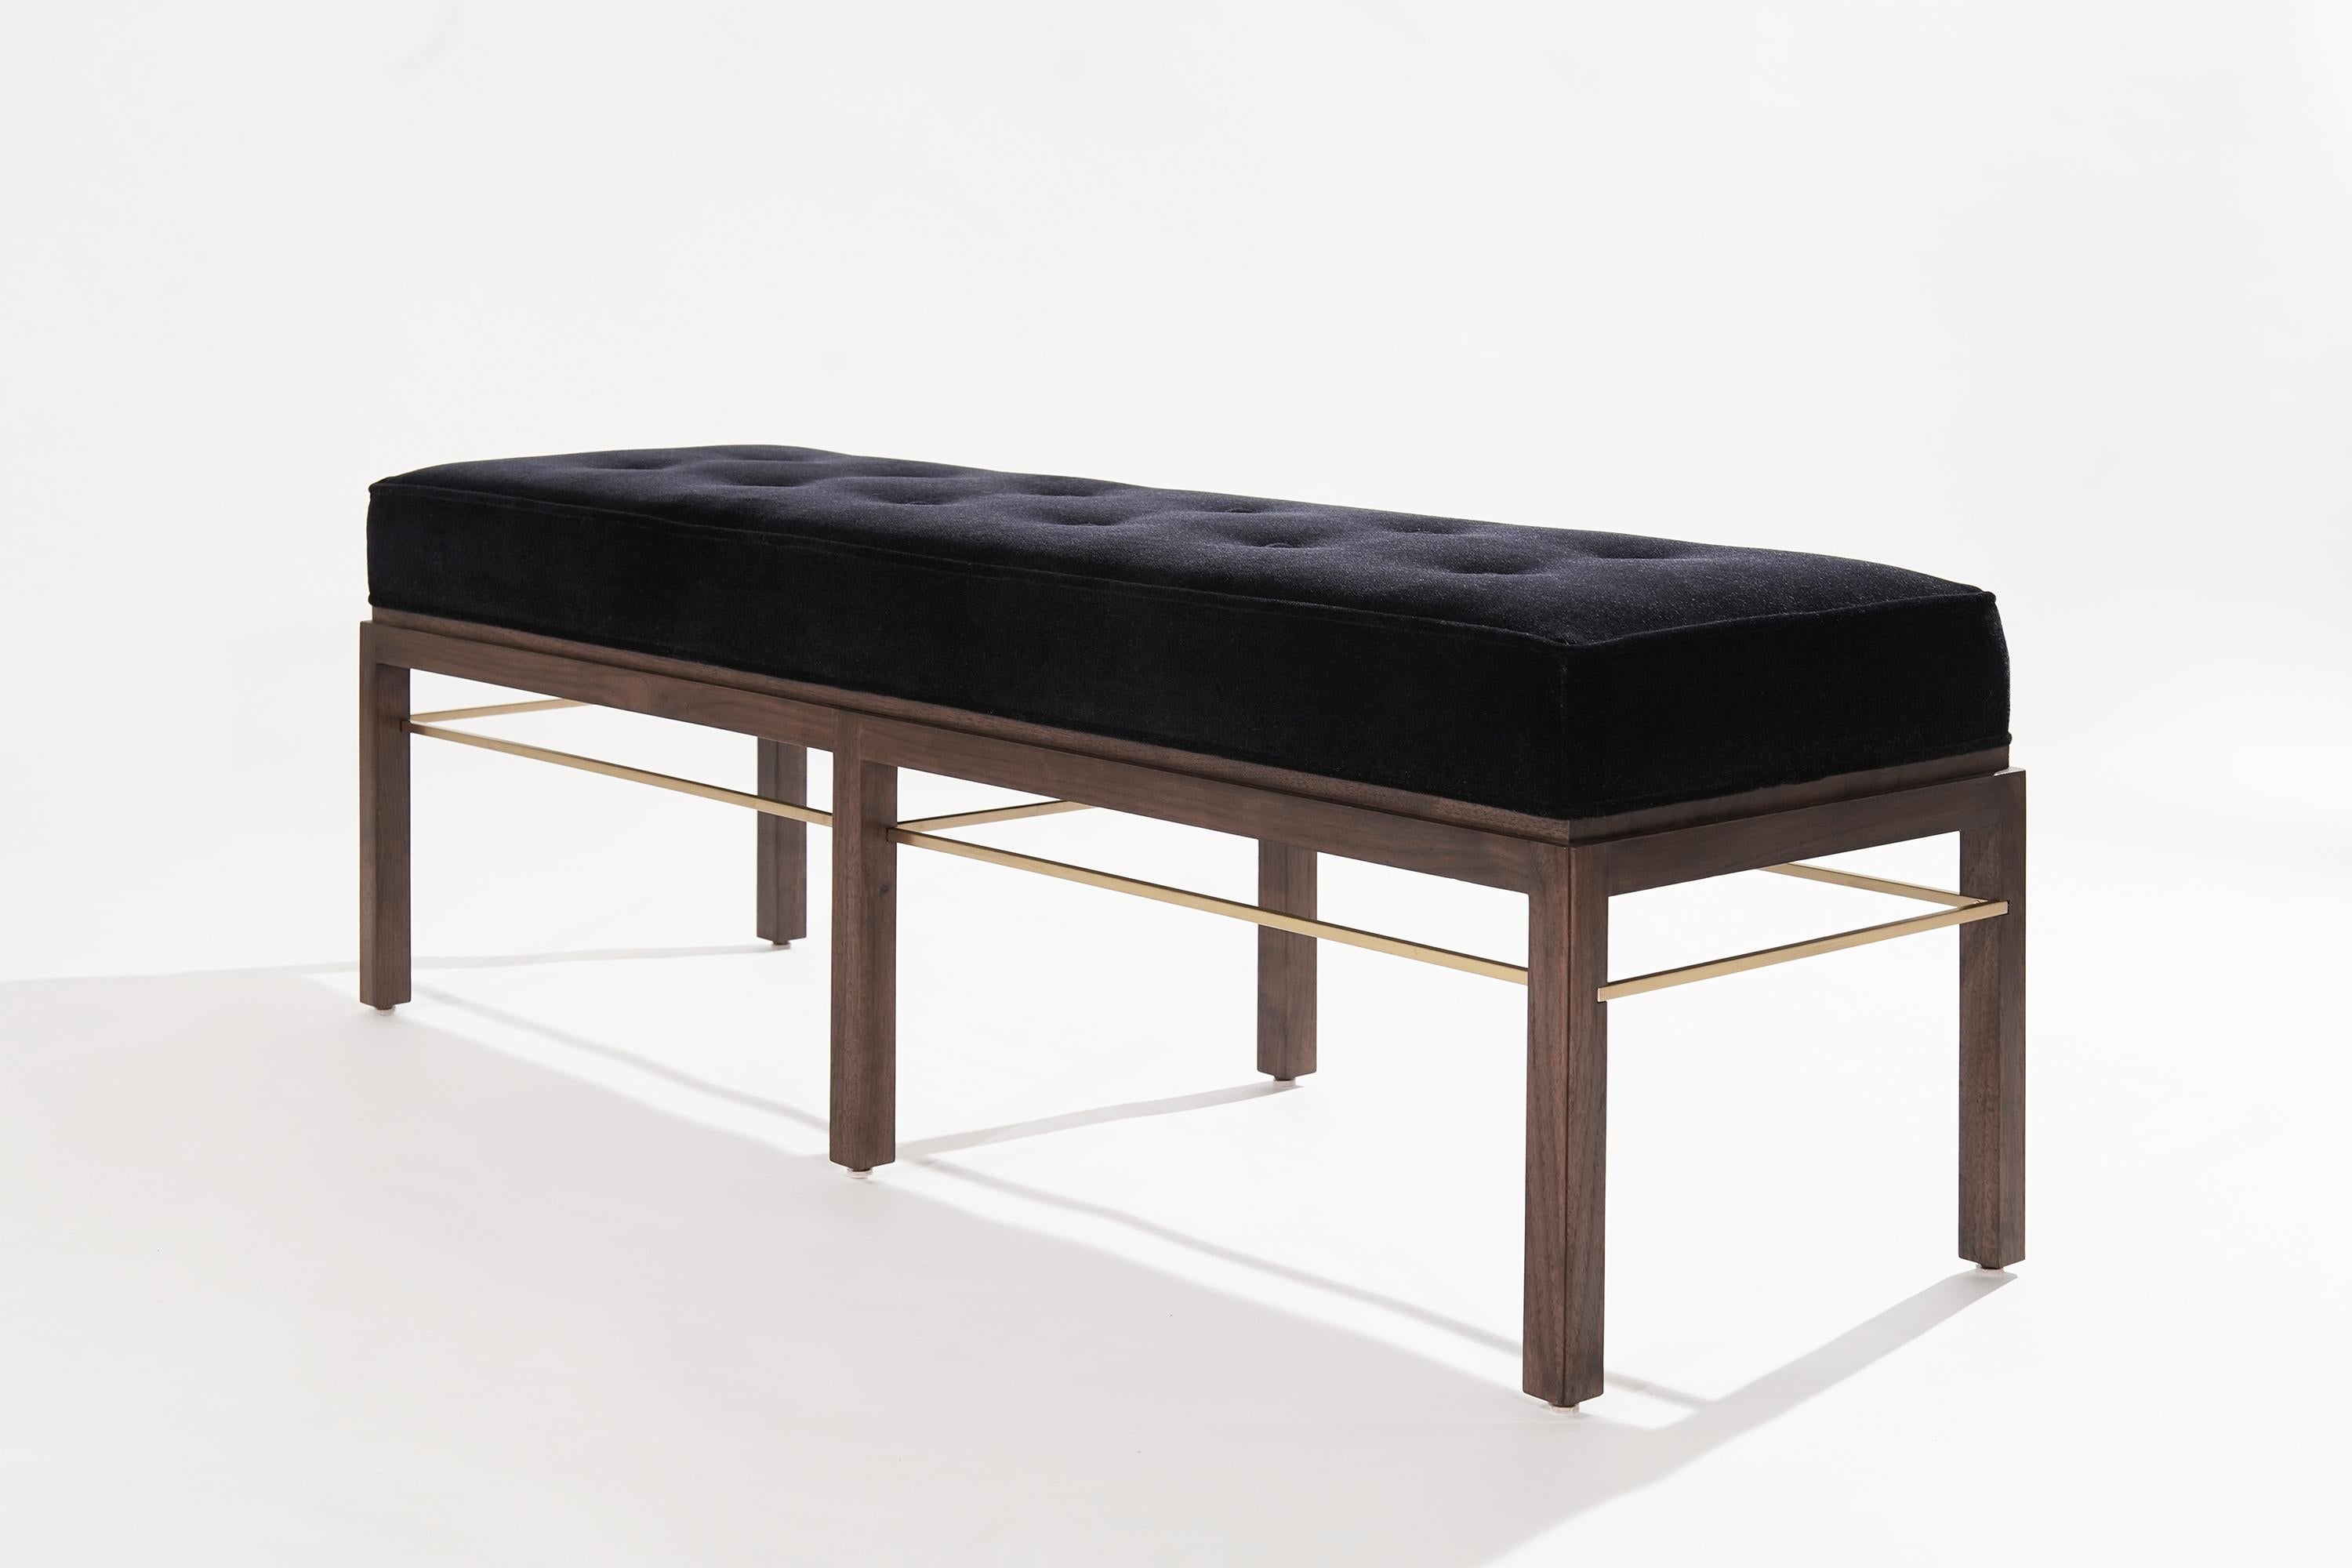 20th Century Brass-Accented Edward Wormley for Dunbar Bench in Mohair, 1950s